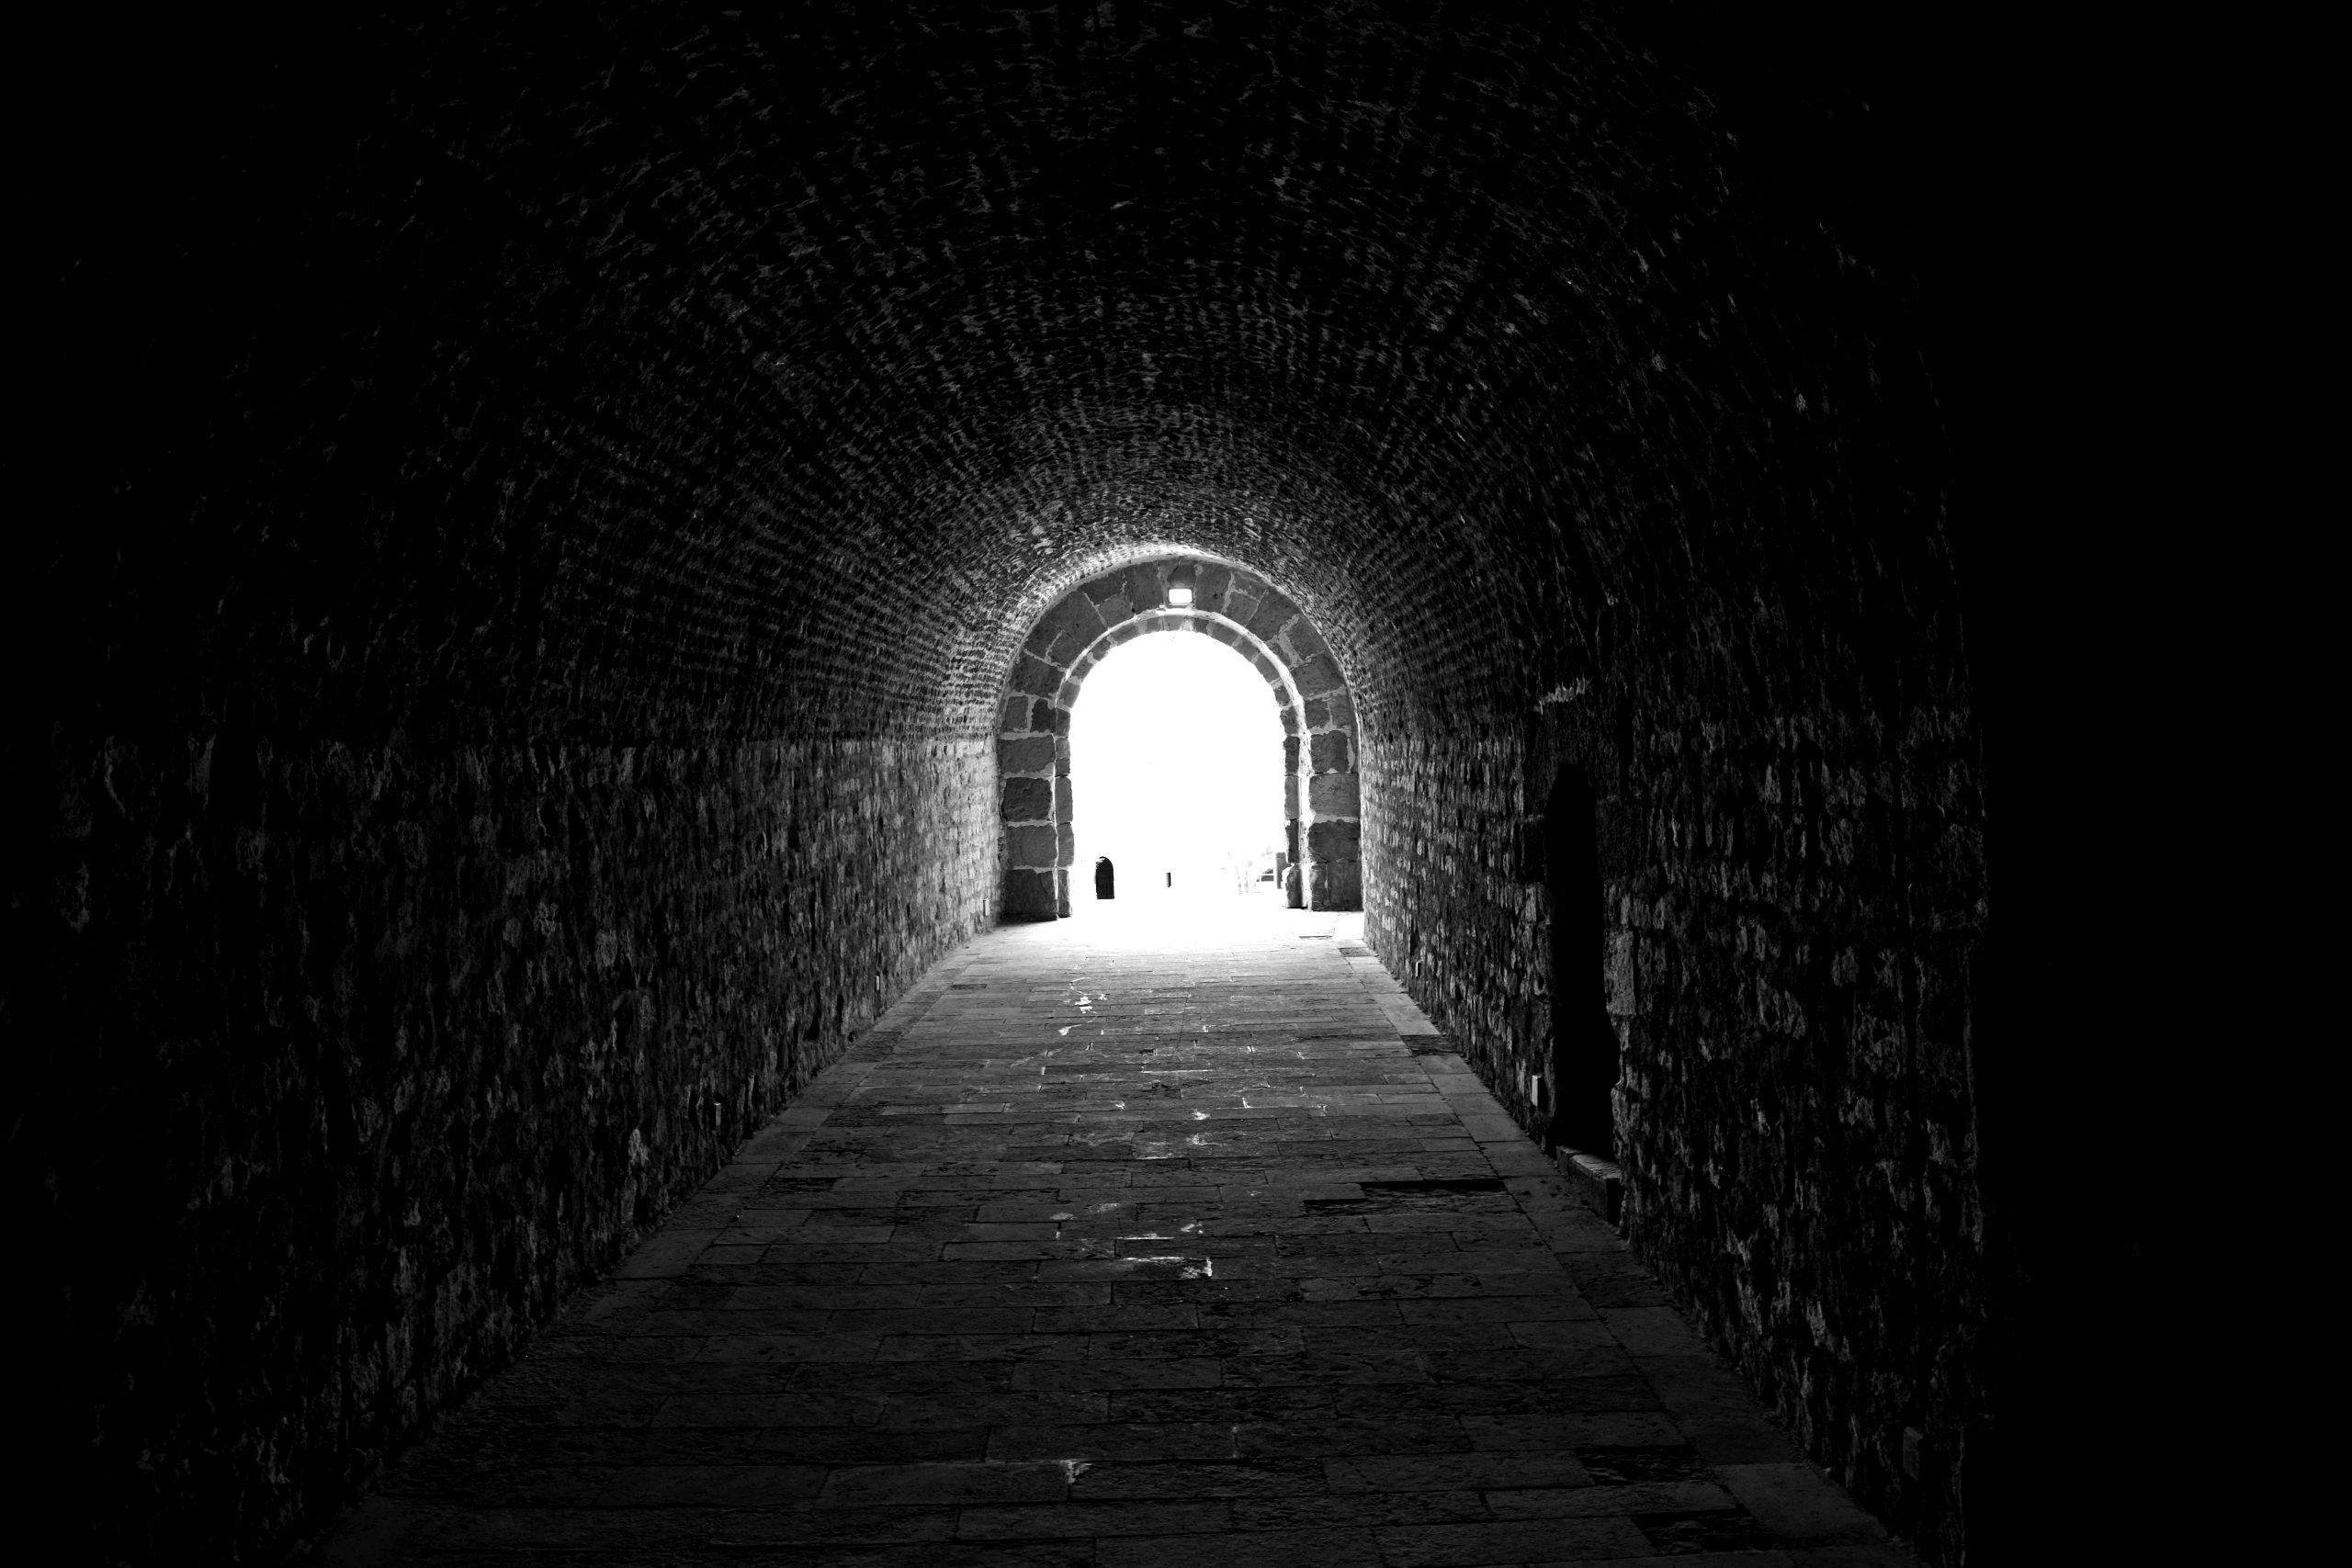 In a tunnel your focus only goes to the end: tunnel-vision